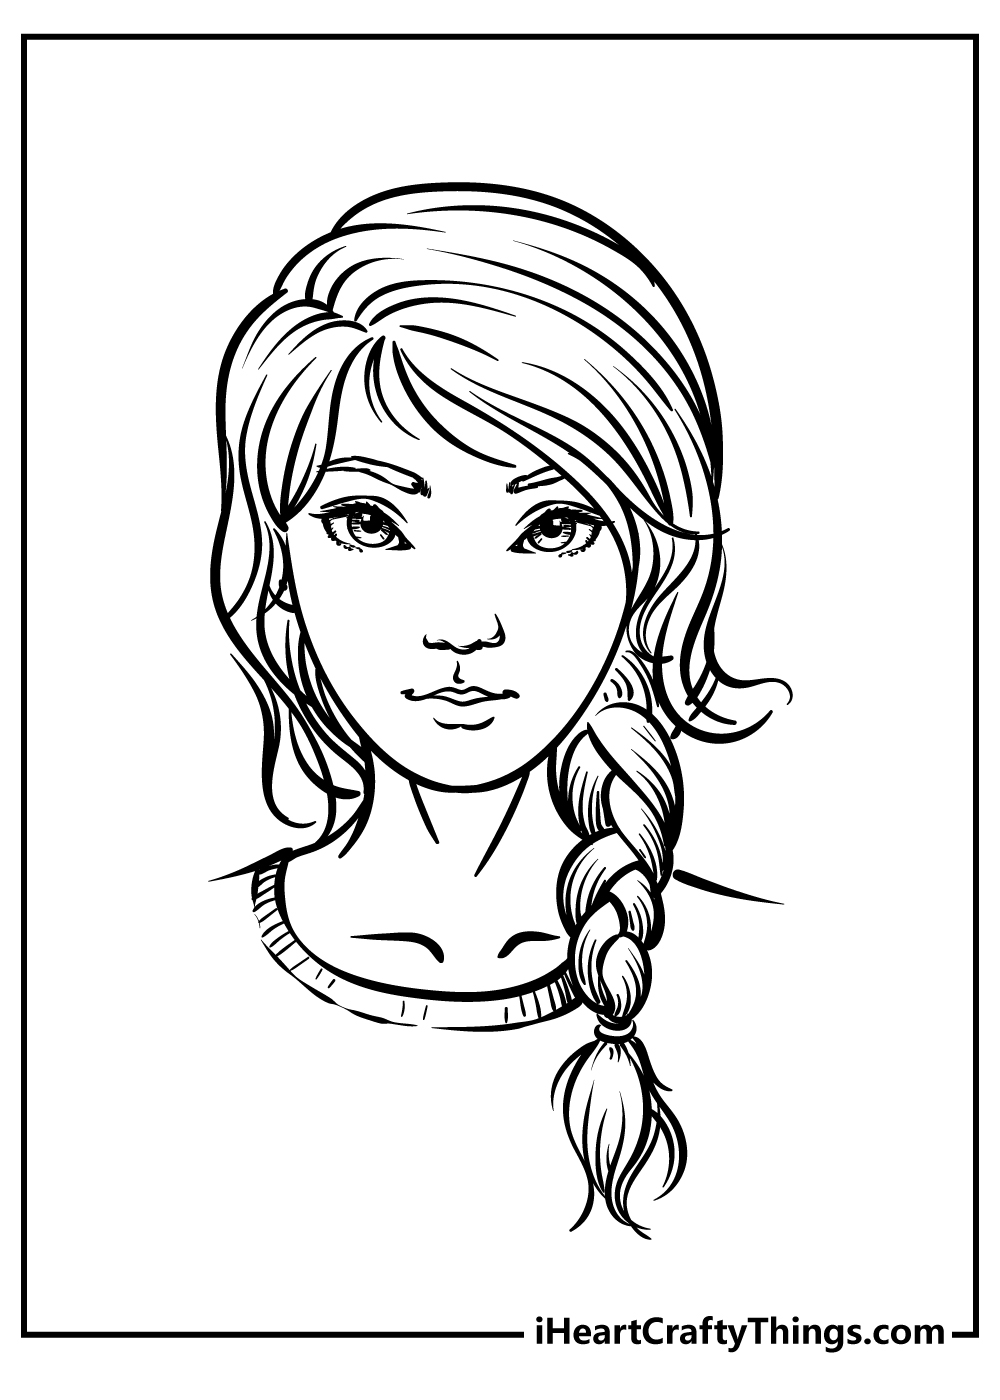 Girly Coloring Pages free pdf download